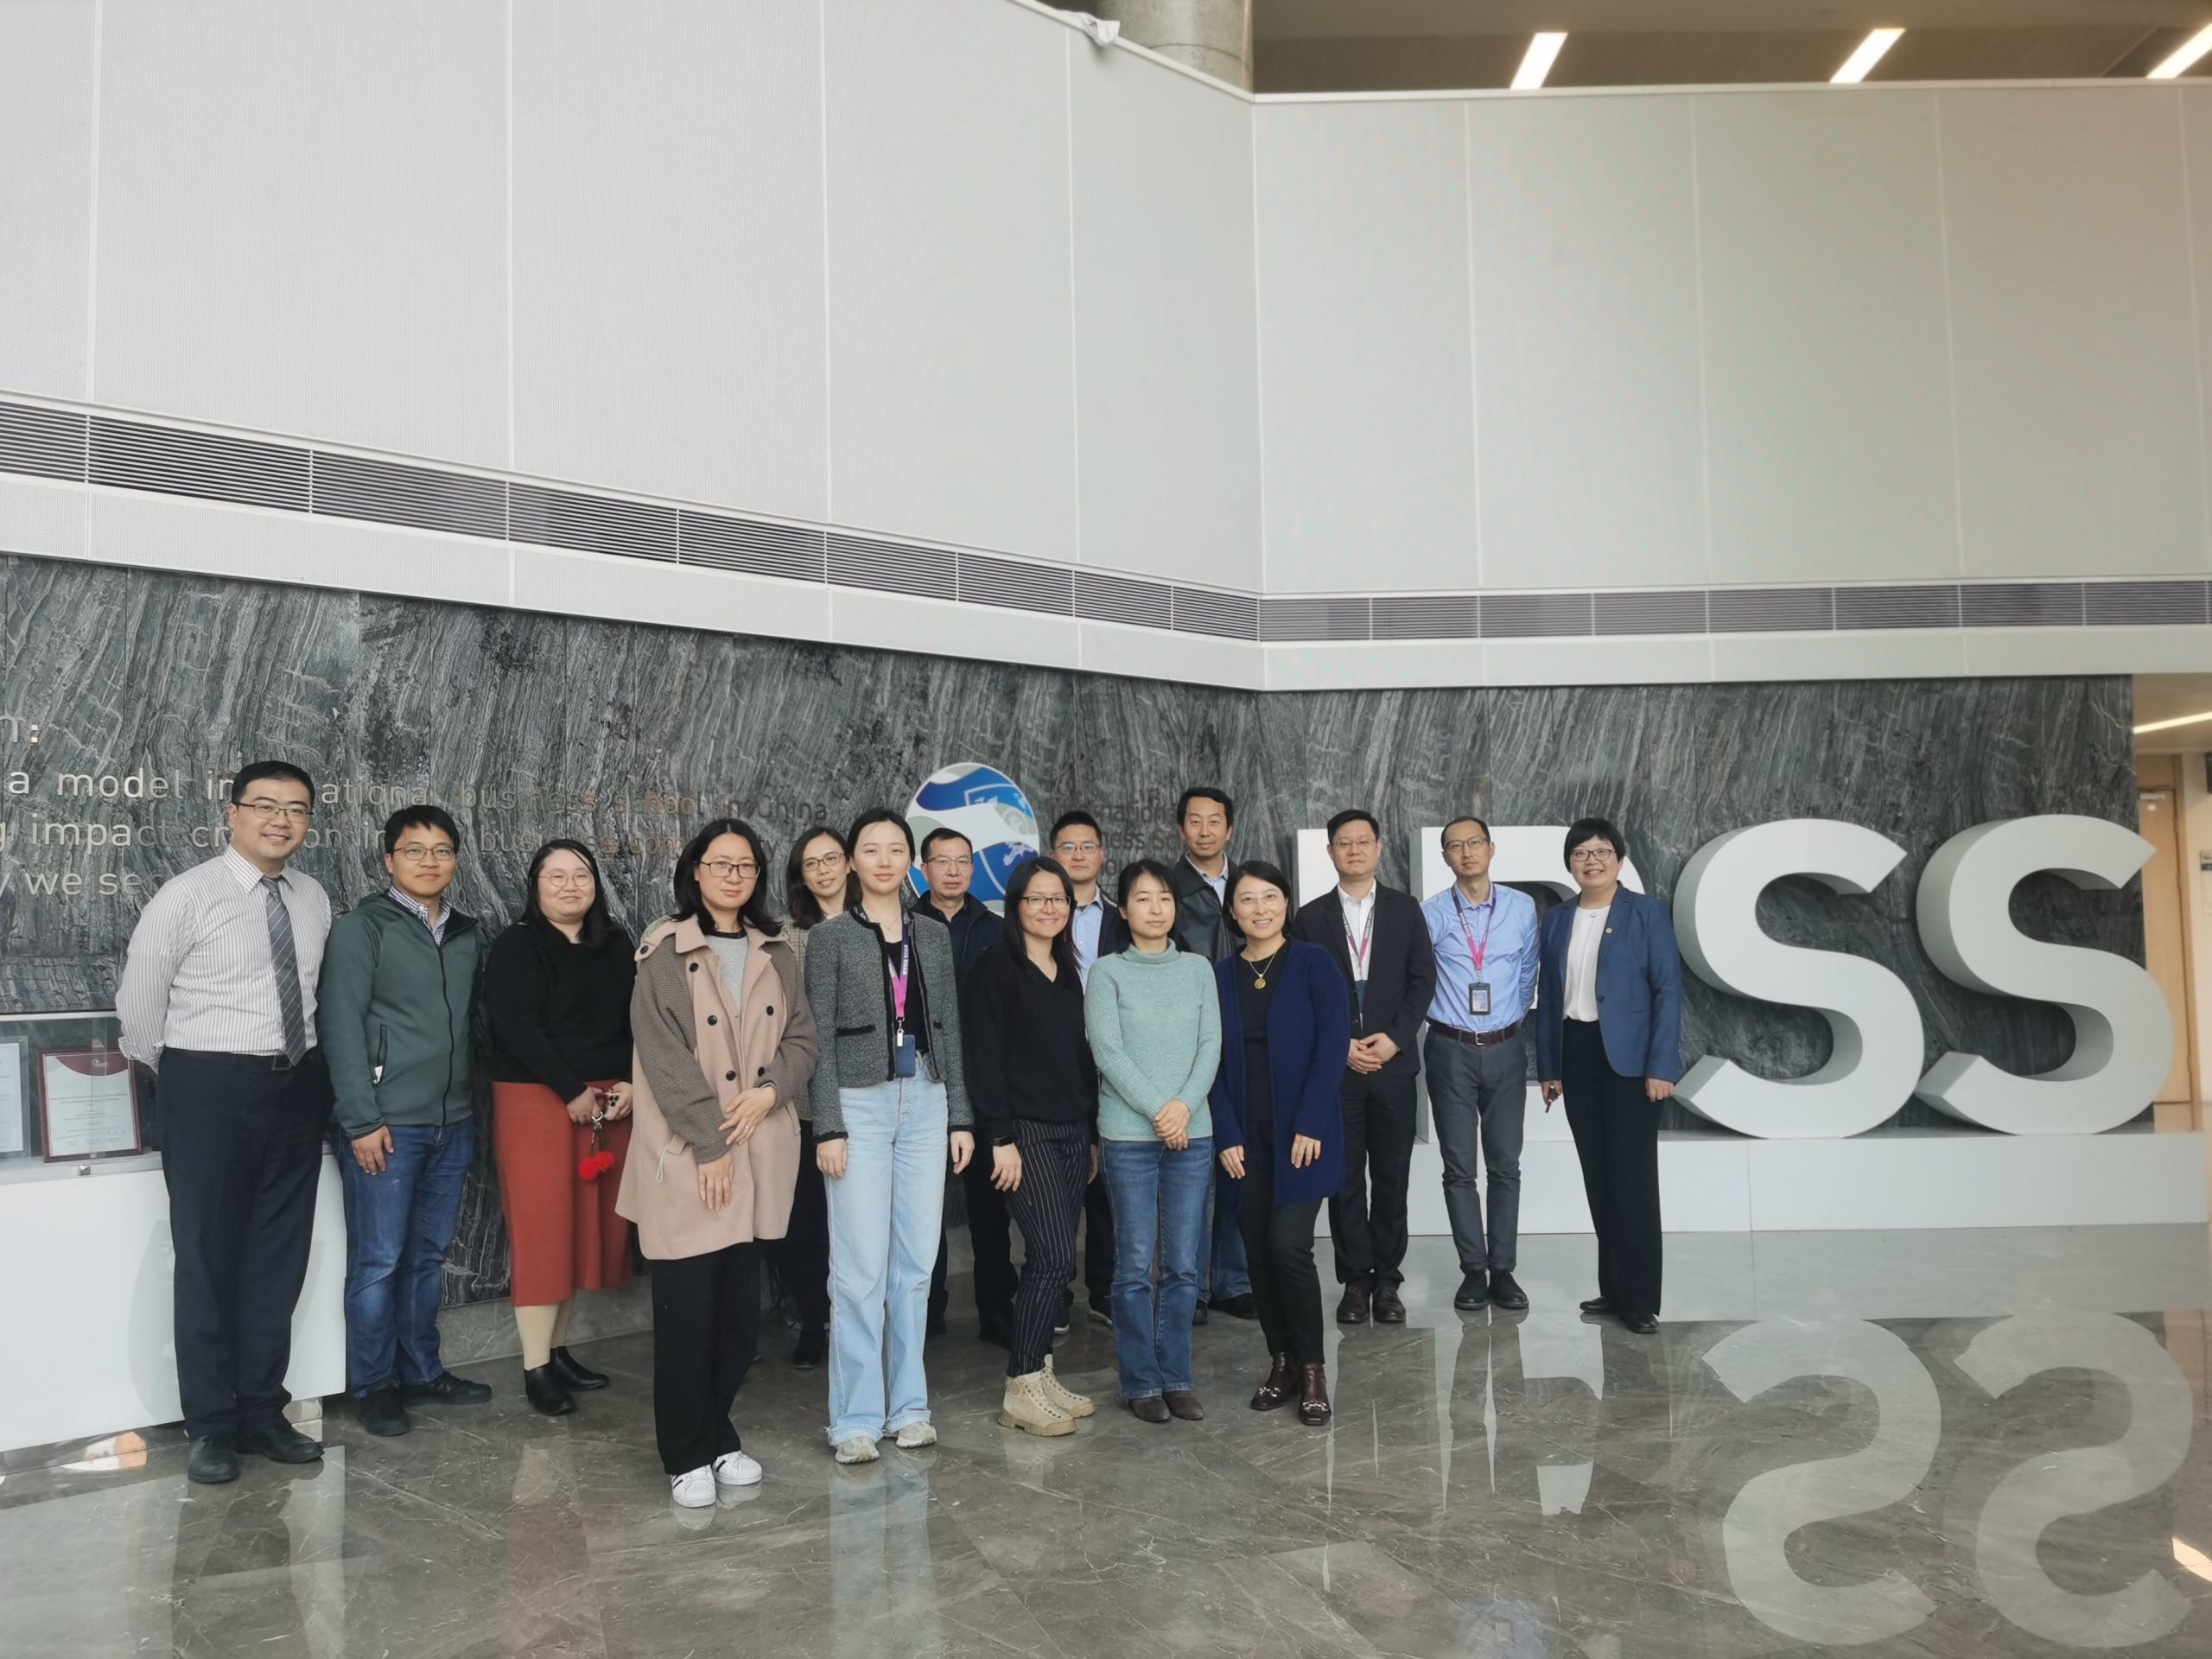 IBSS Welcomes Delegation from SILC Business School